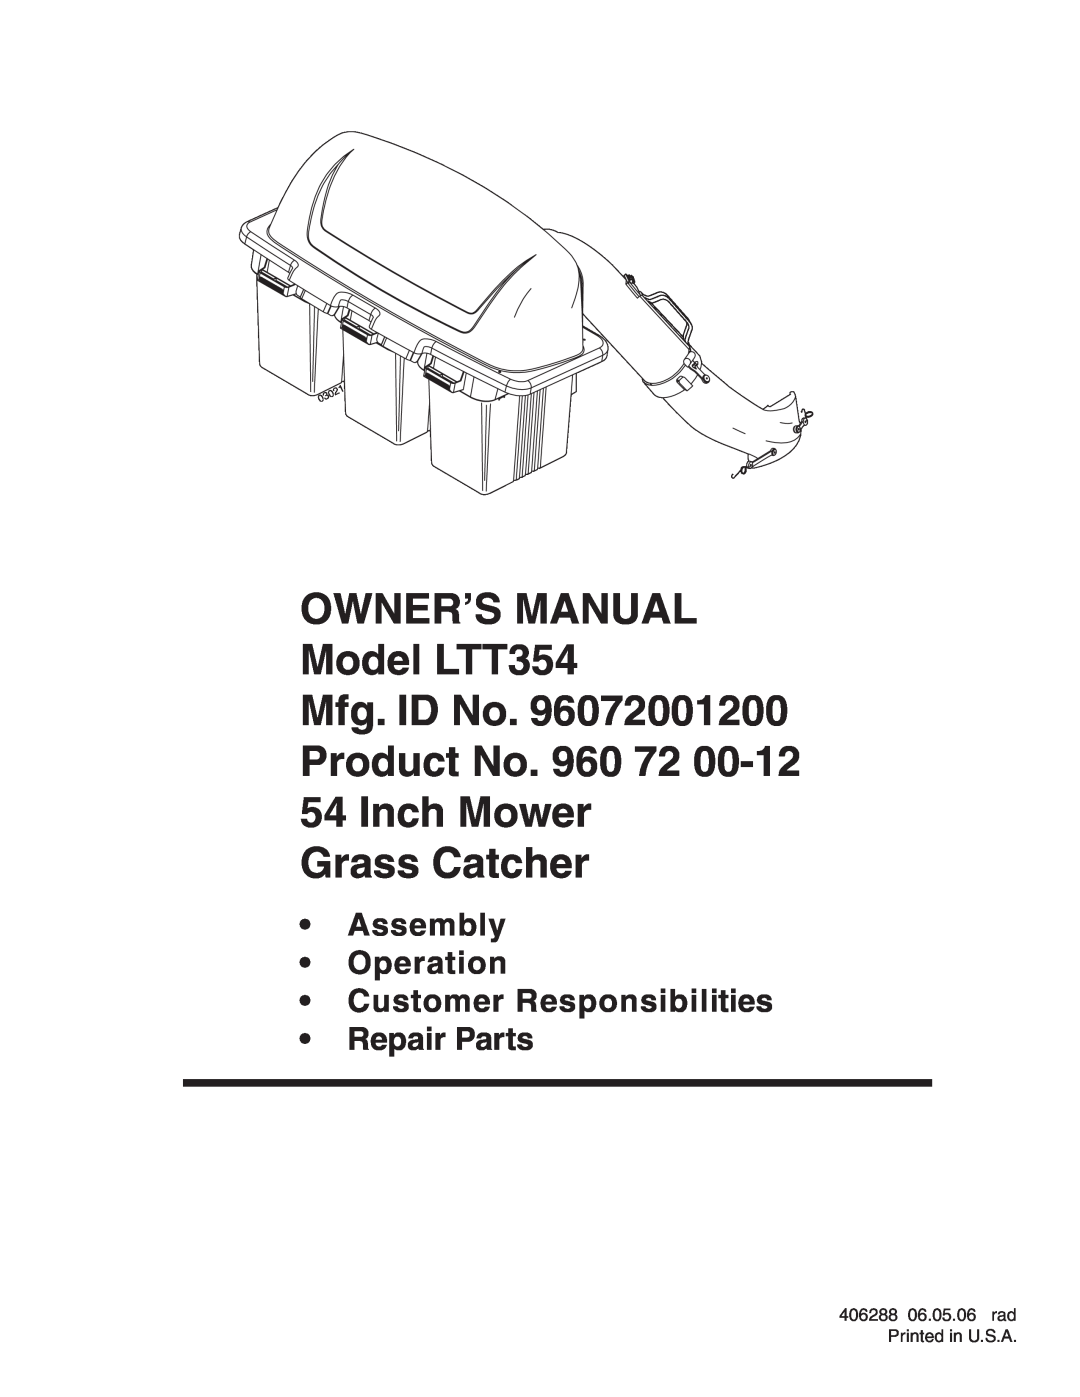 Poulan 96072001200 owner manual Inch Mower Grass Catcher, Assembly Operation Customer Responsibilities Repair Parts 